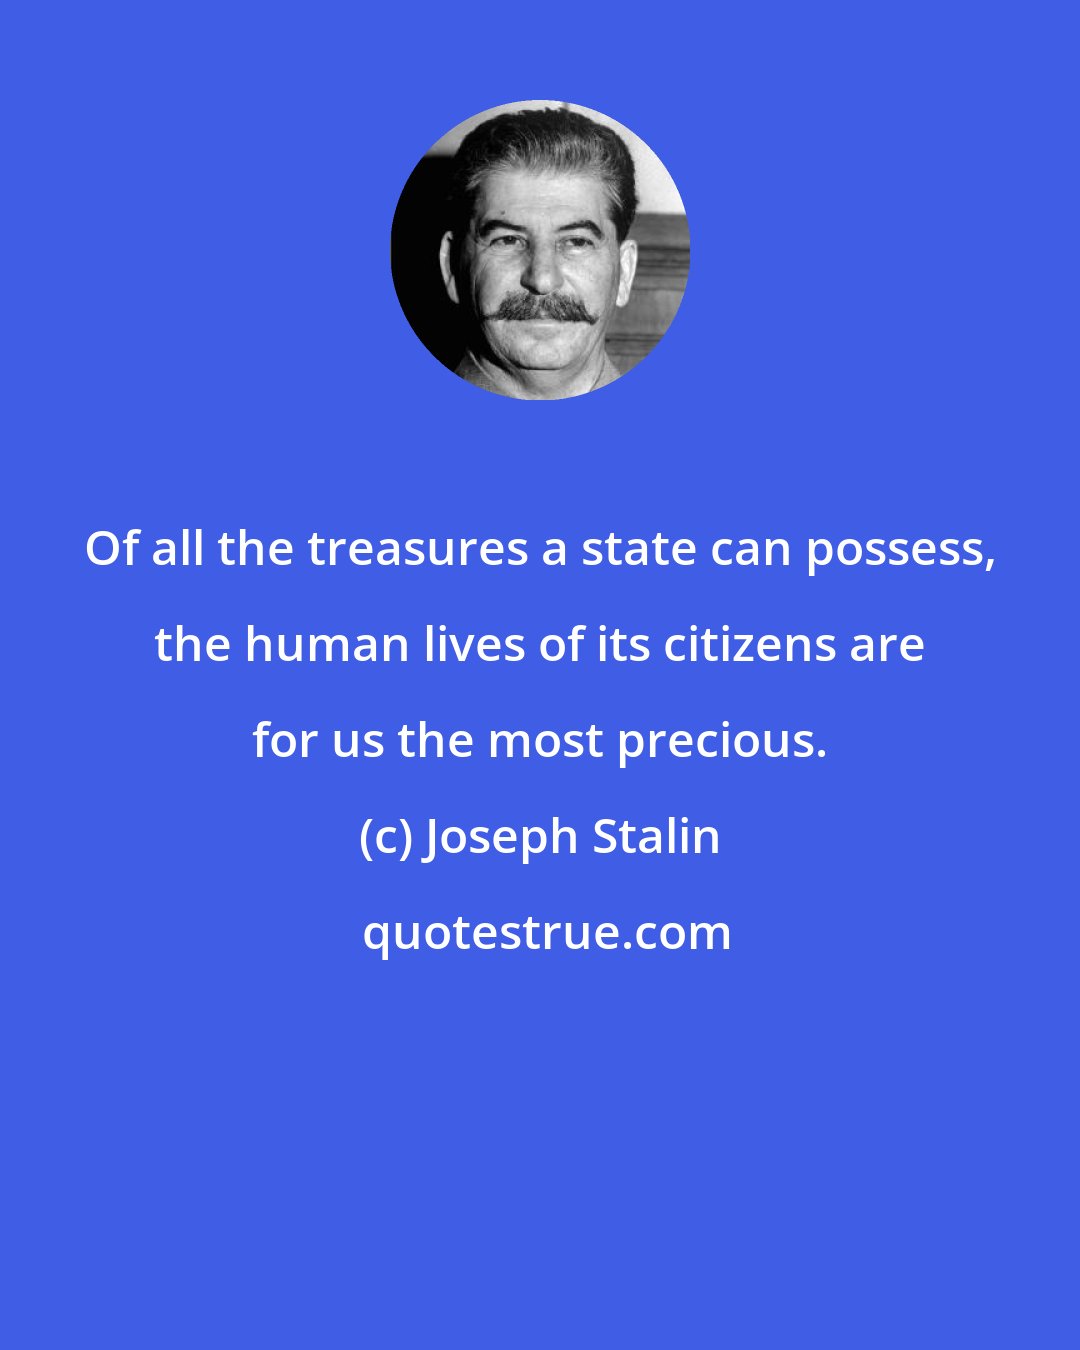 Joseph Stalin: Of all the treasures a state can possess, the human lives of its citizens are for us the most precious.